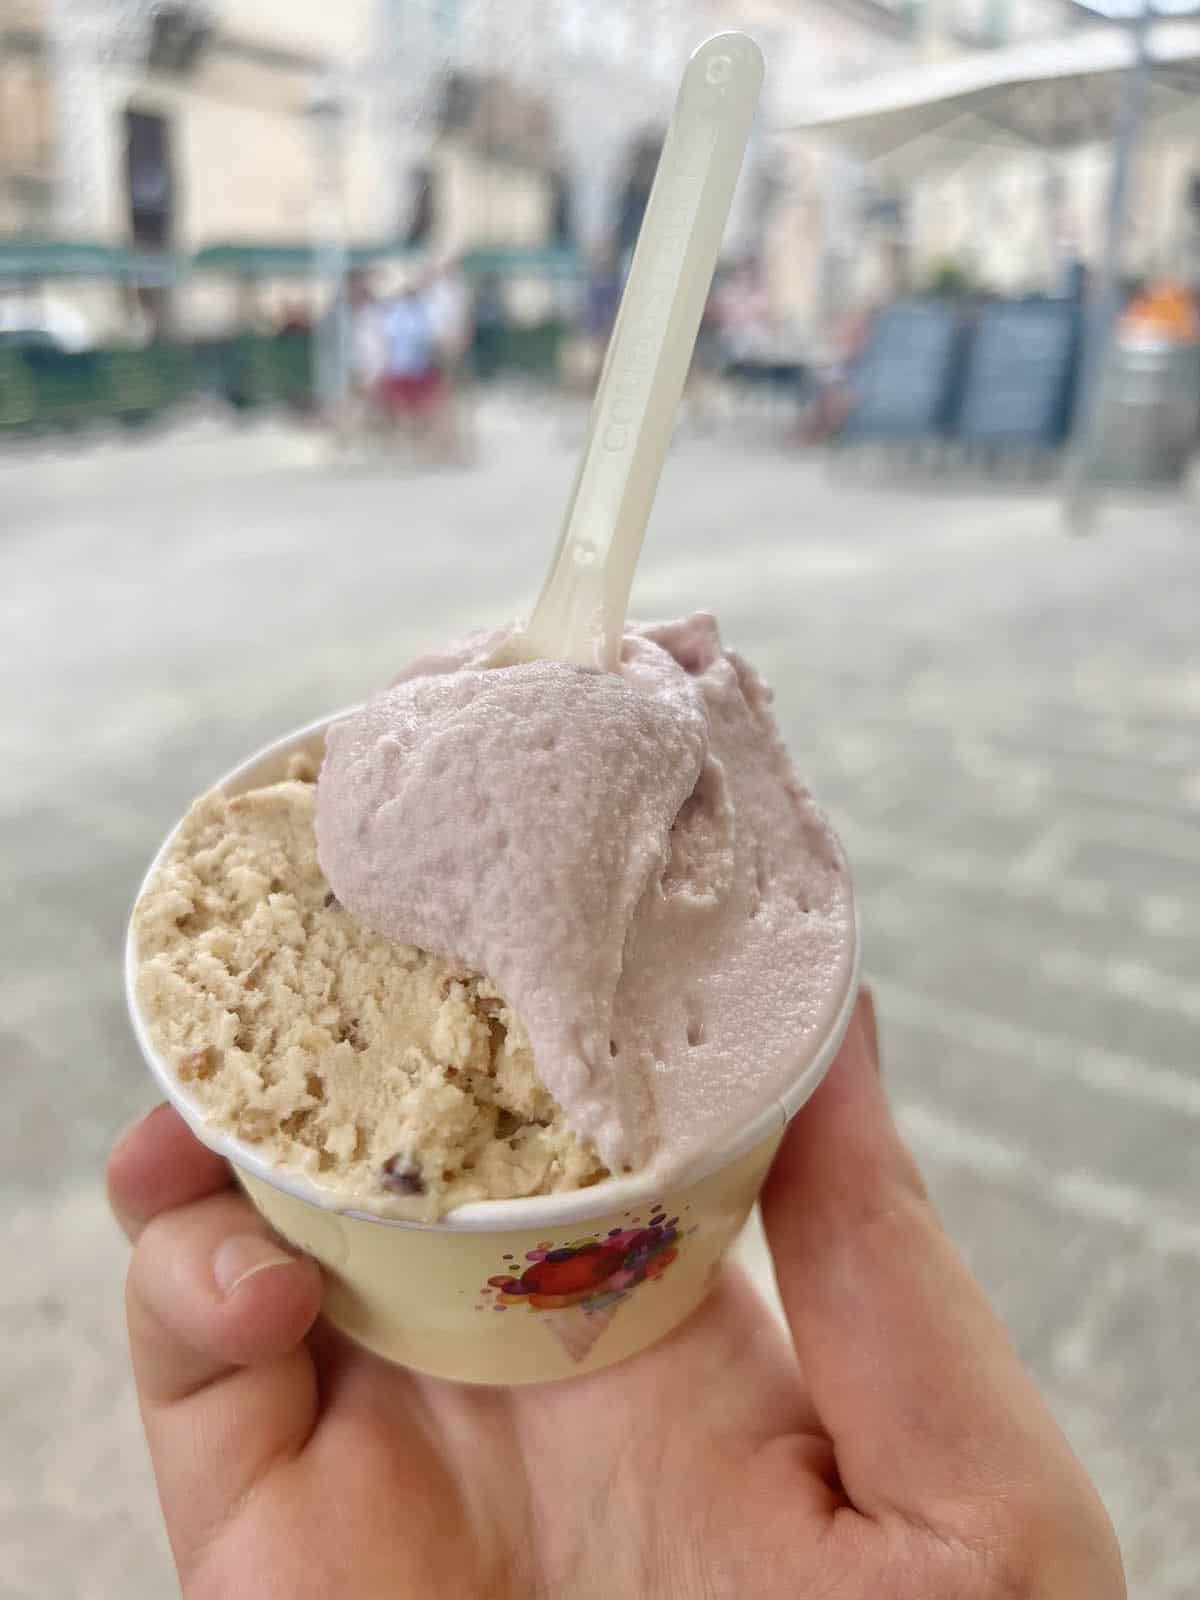 An image of a hand holding a cup of gelato from Gelati DiVini in Ragusa, Sicily. The streetscape of Ragusa Ibla is in the background